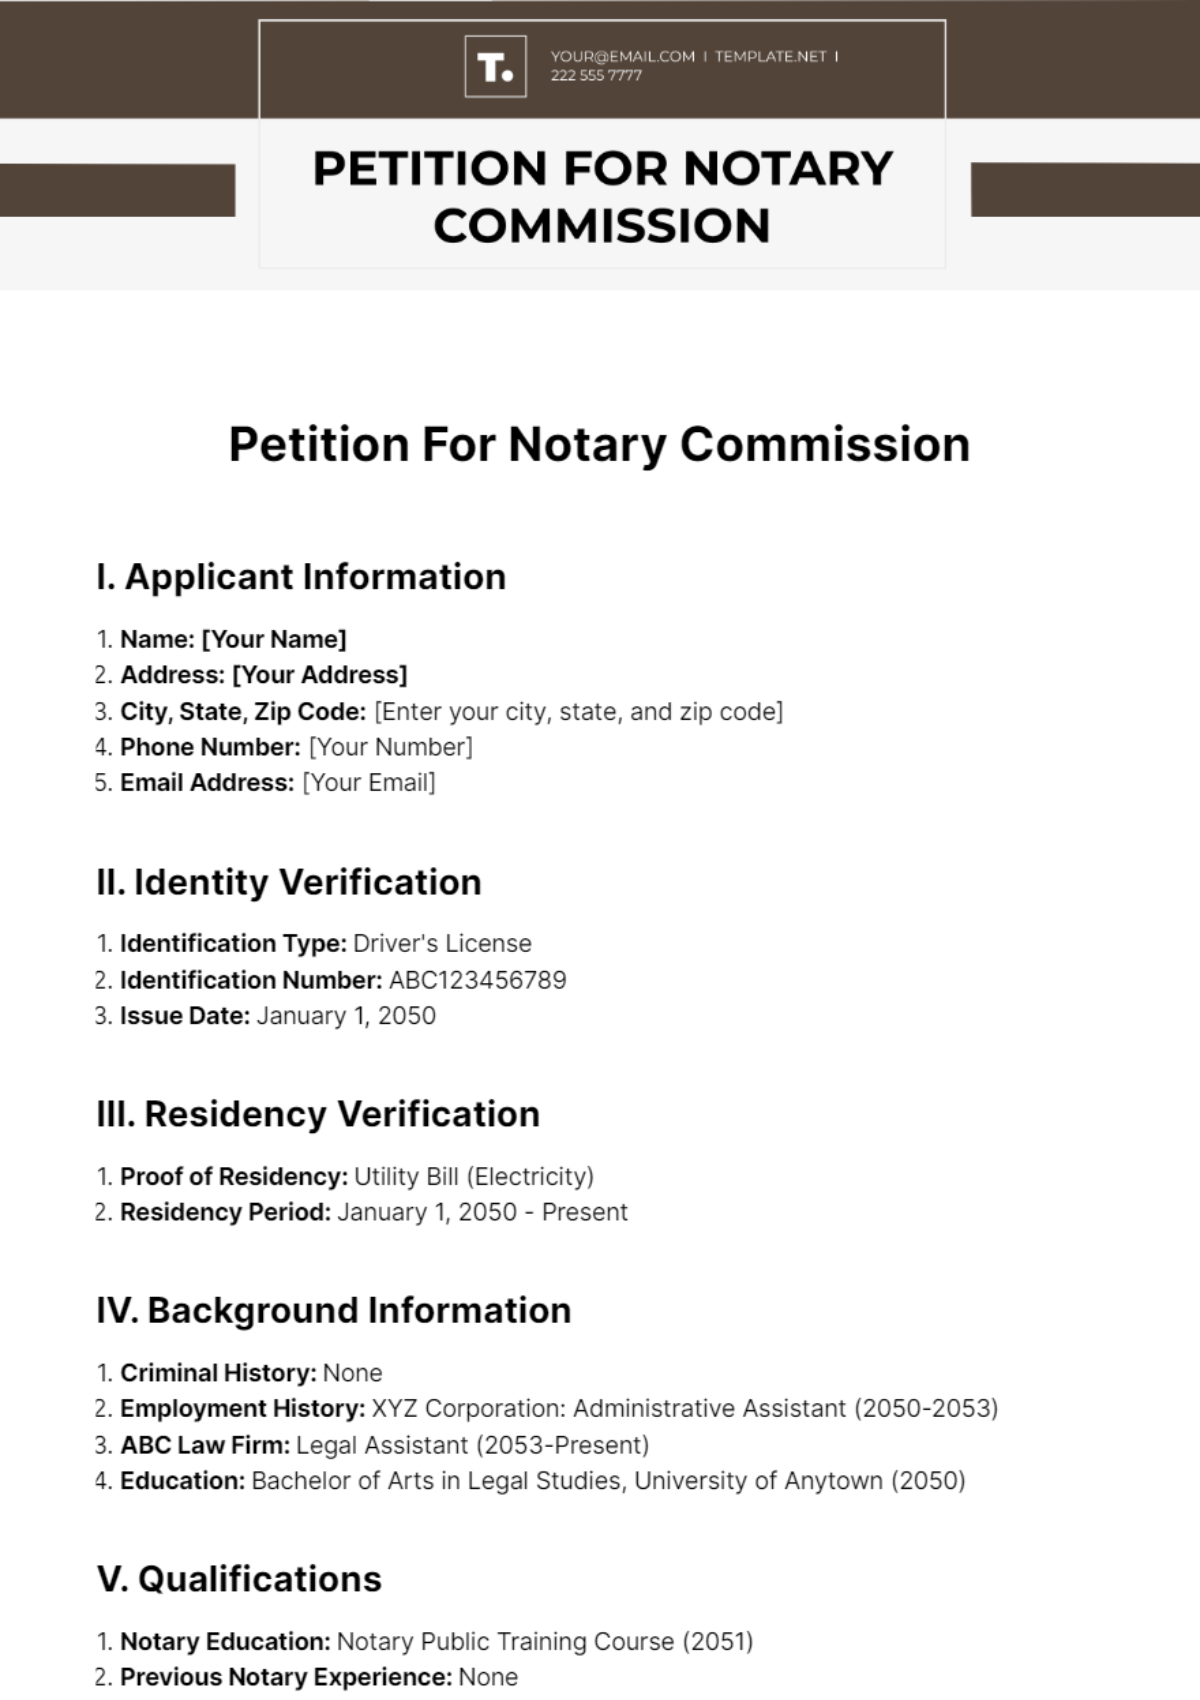 Petition For Notary Commission Template